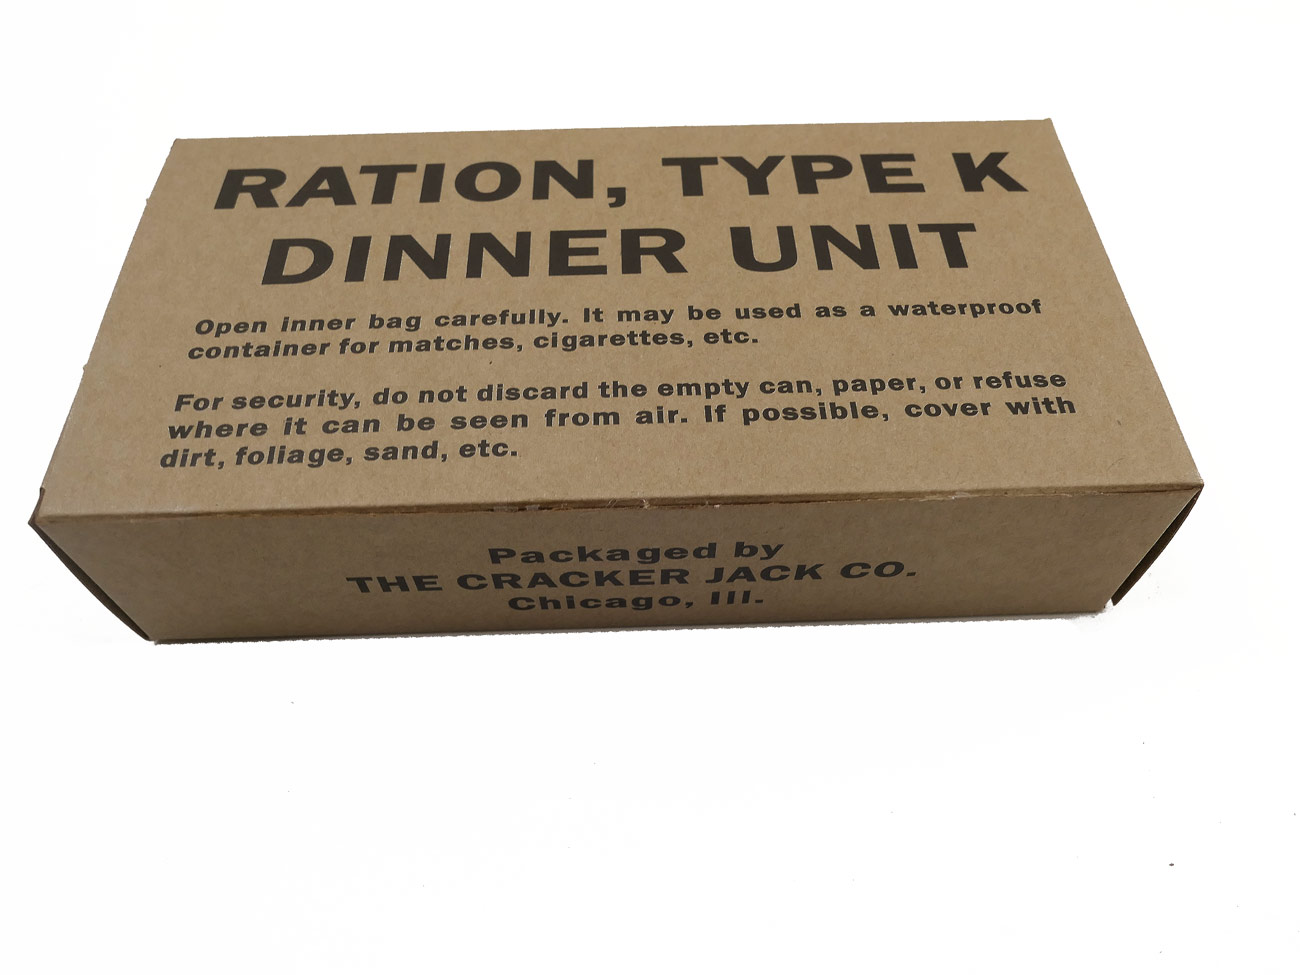 US ARMY WW2 Rations Type K Dinner Unit / Rations Box Carton Catering ...